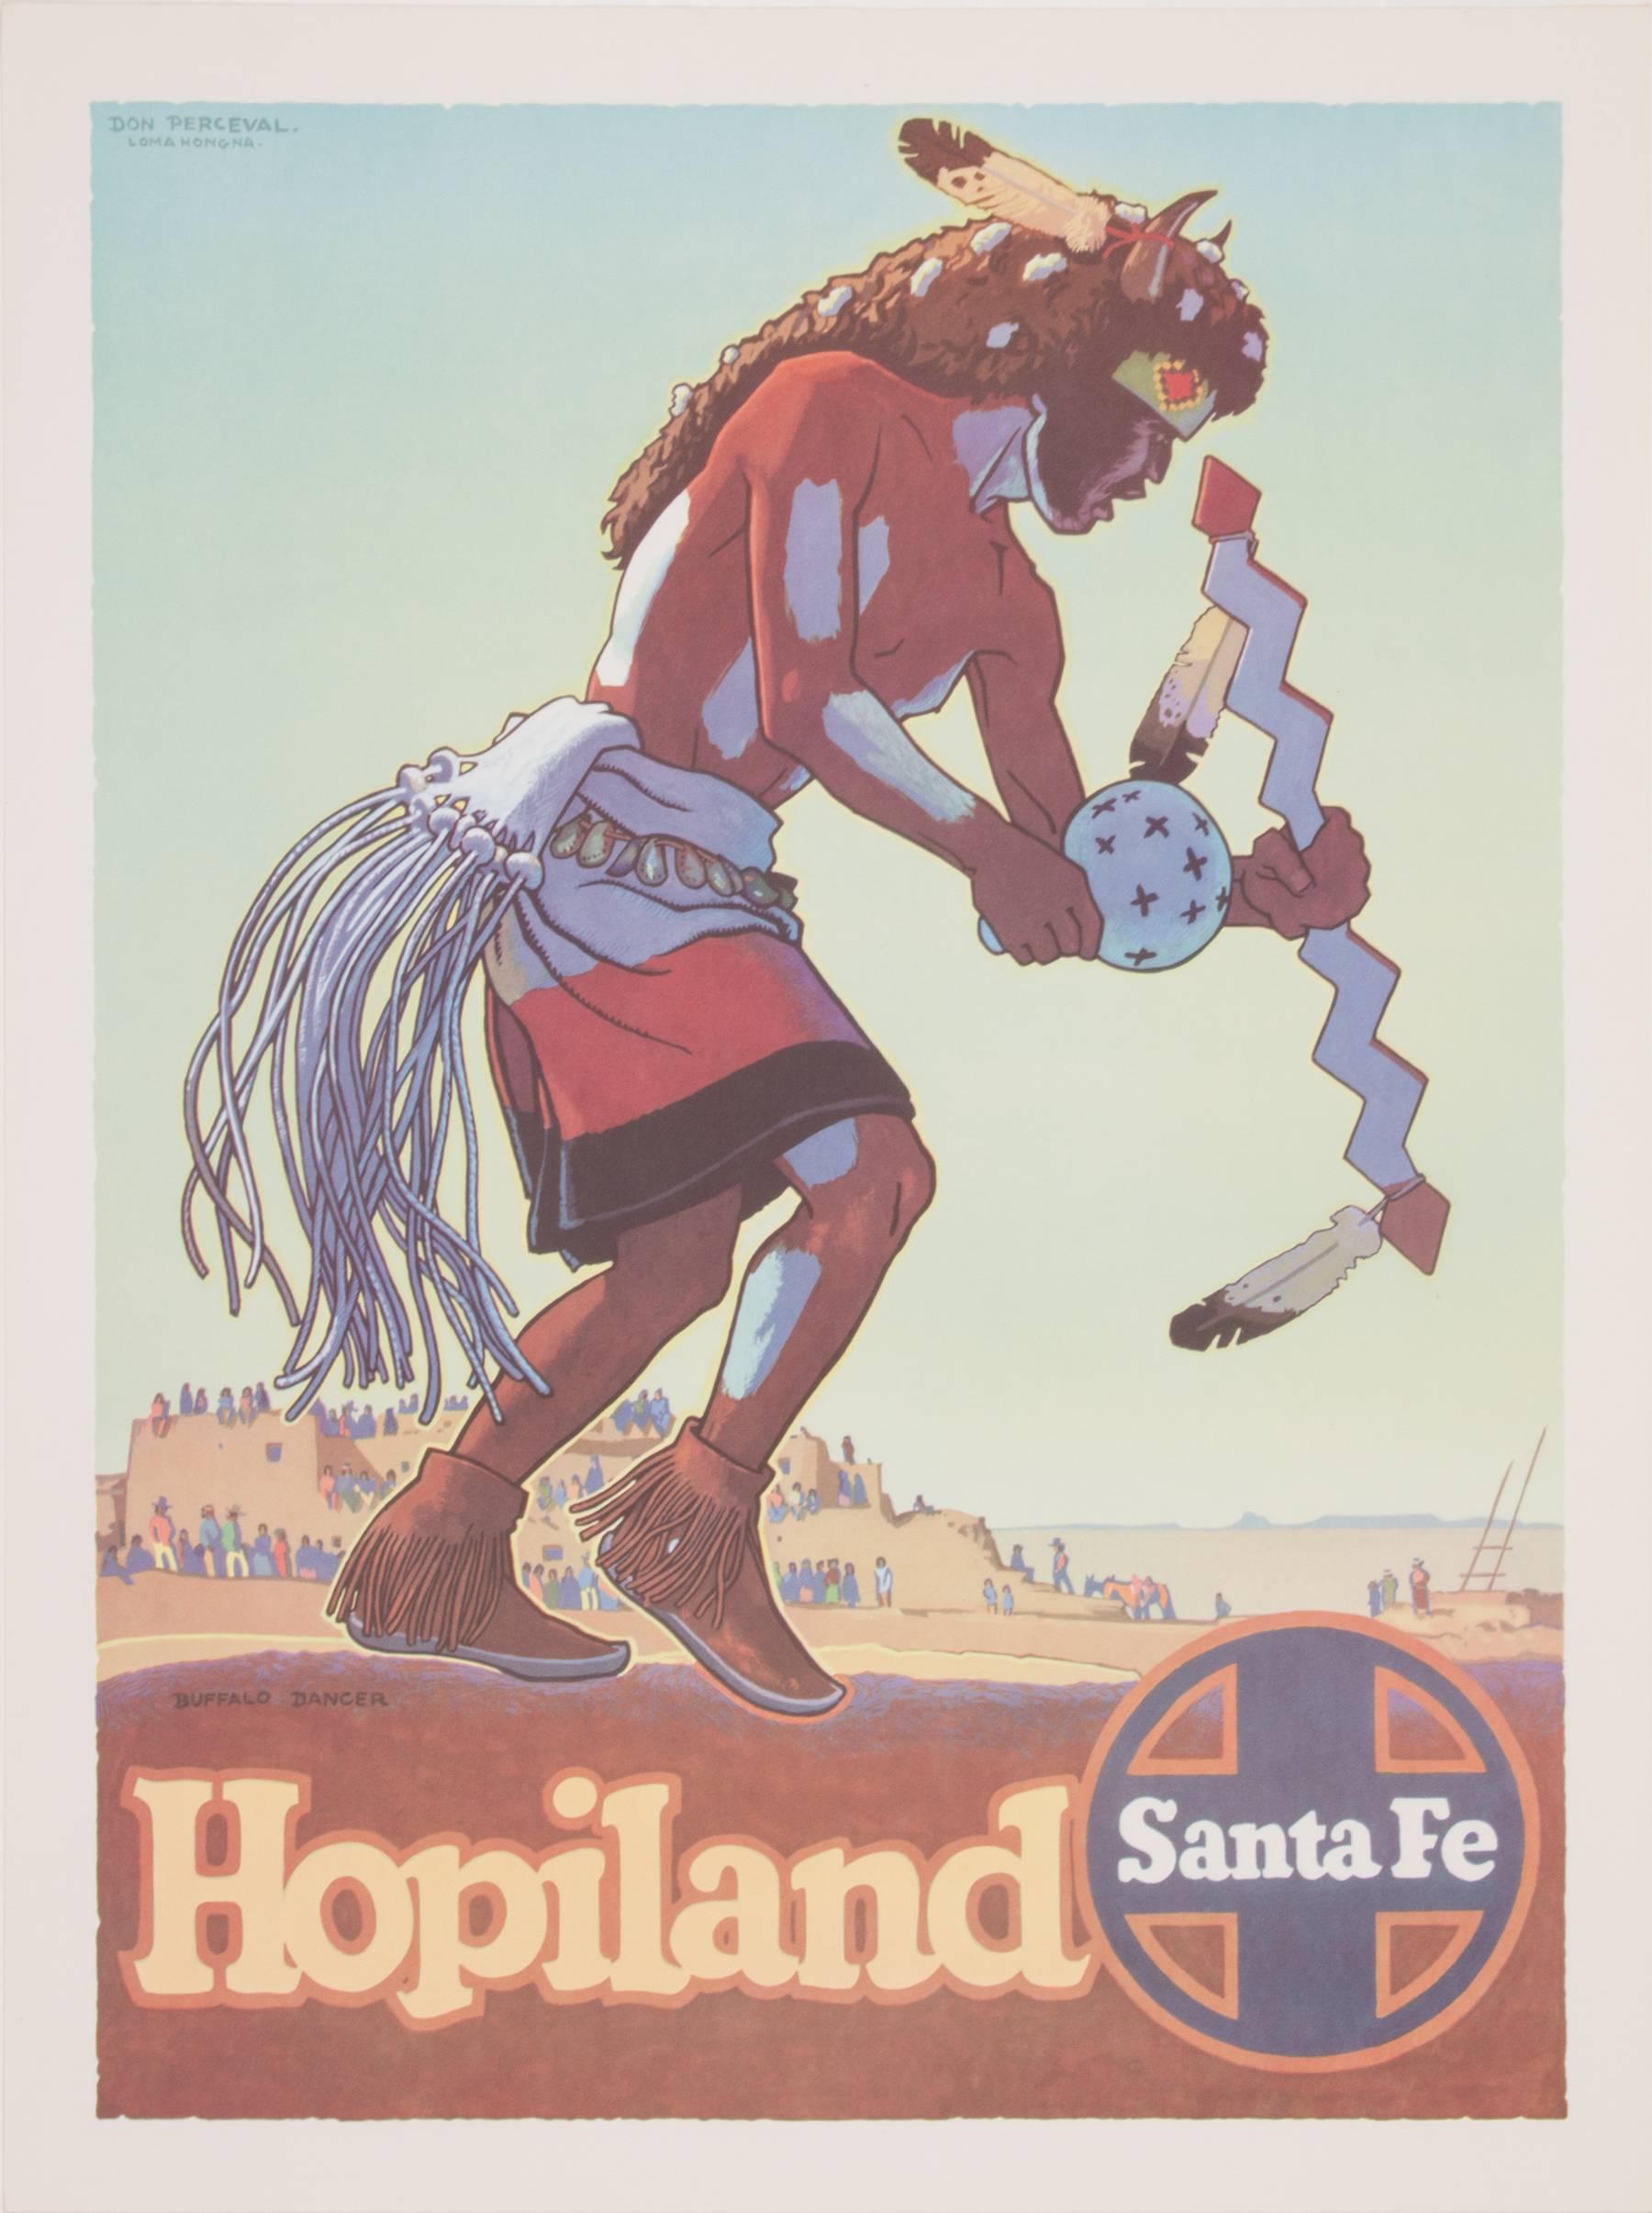 Depicting the buffalo dancer, this is a rare poster by Don Perceval for the Sante Fe Railroad.